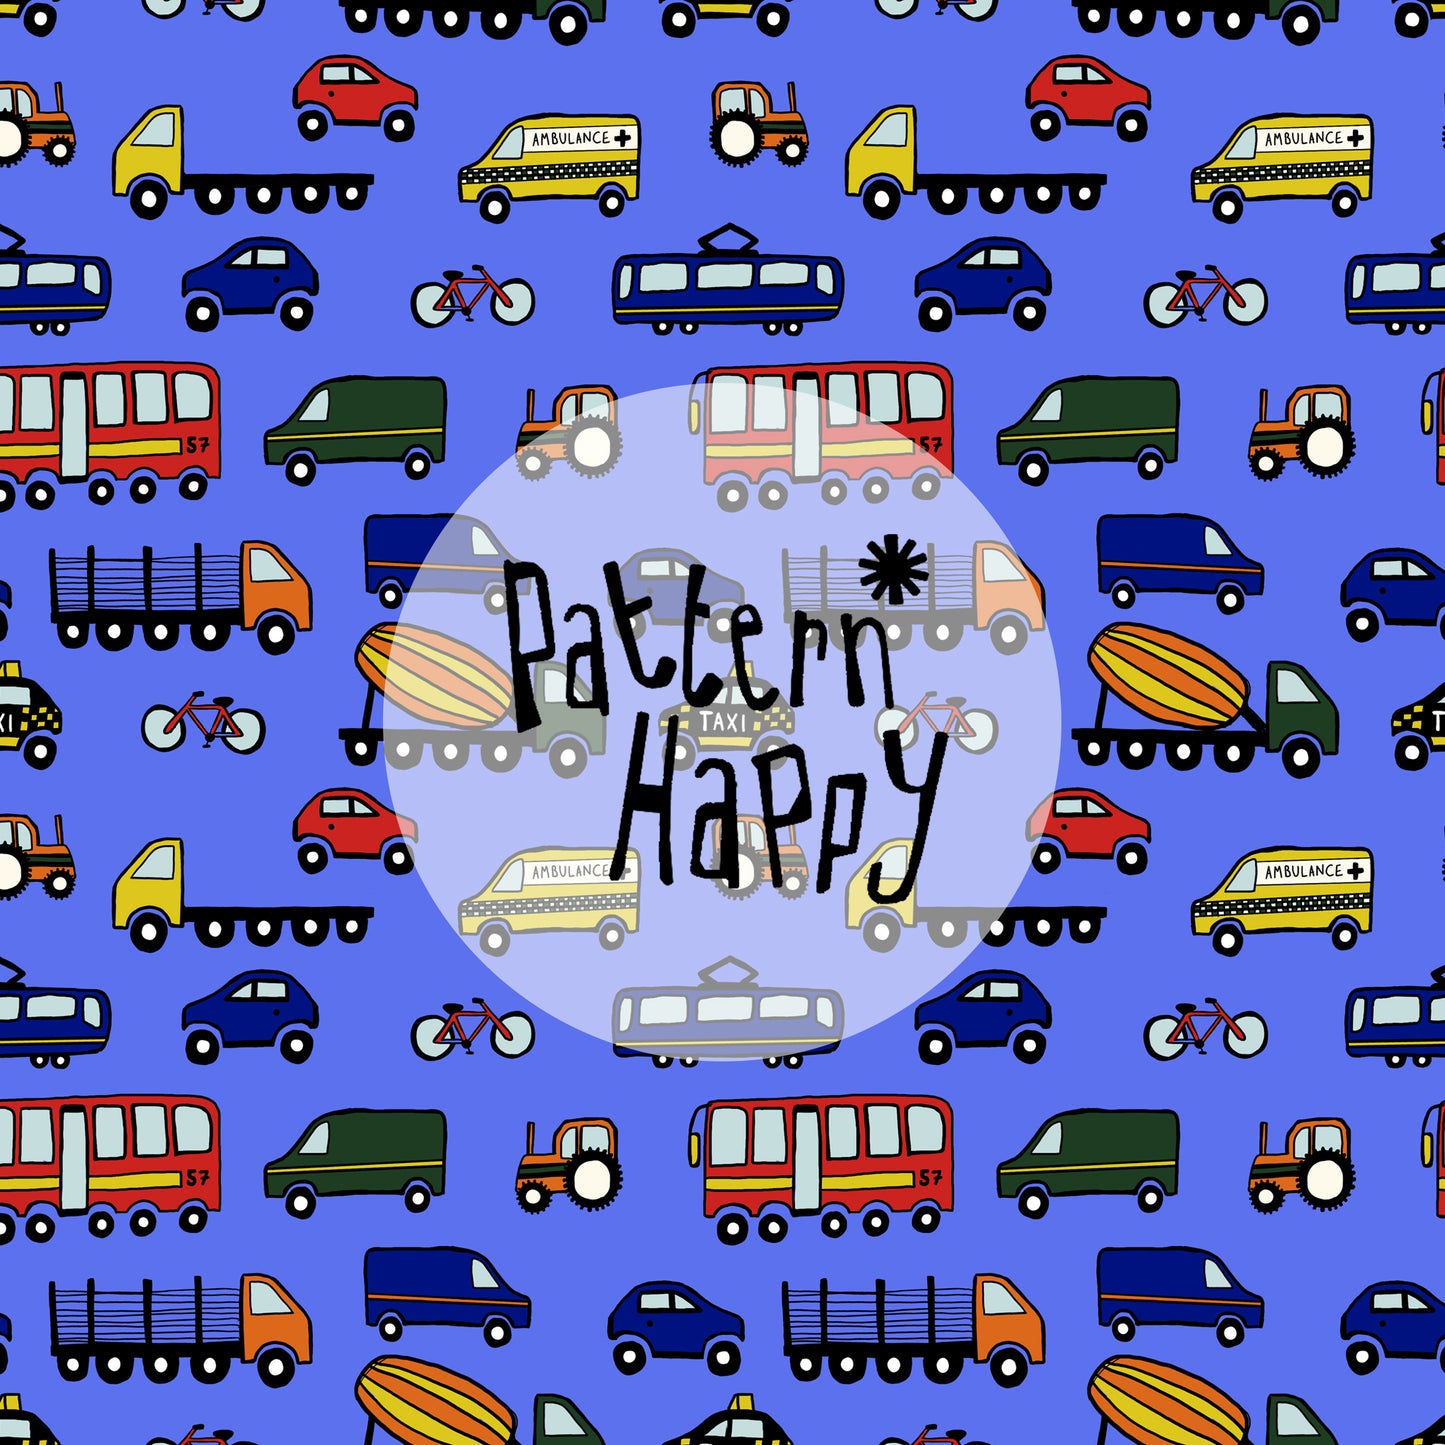 Pattern, All over transport icons on cornflower blue